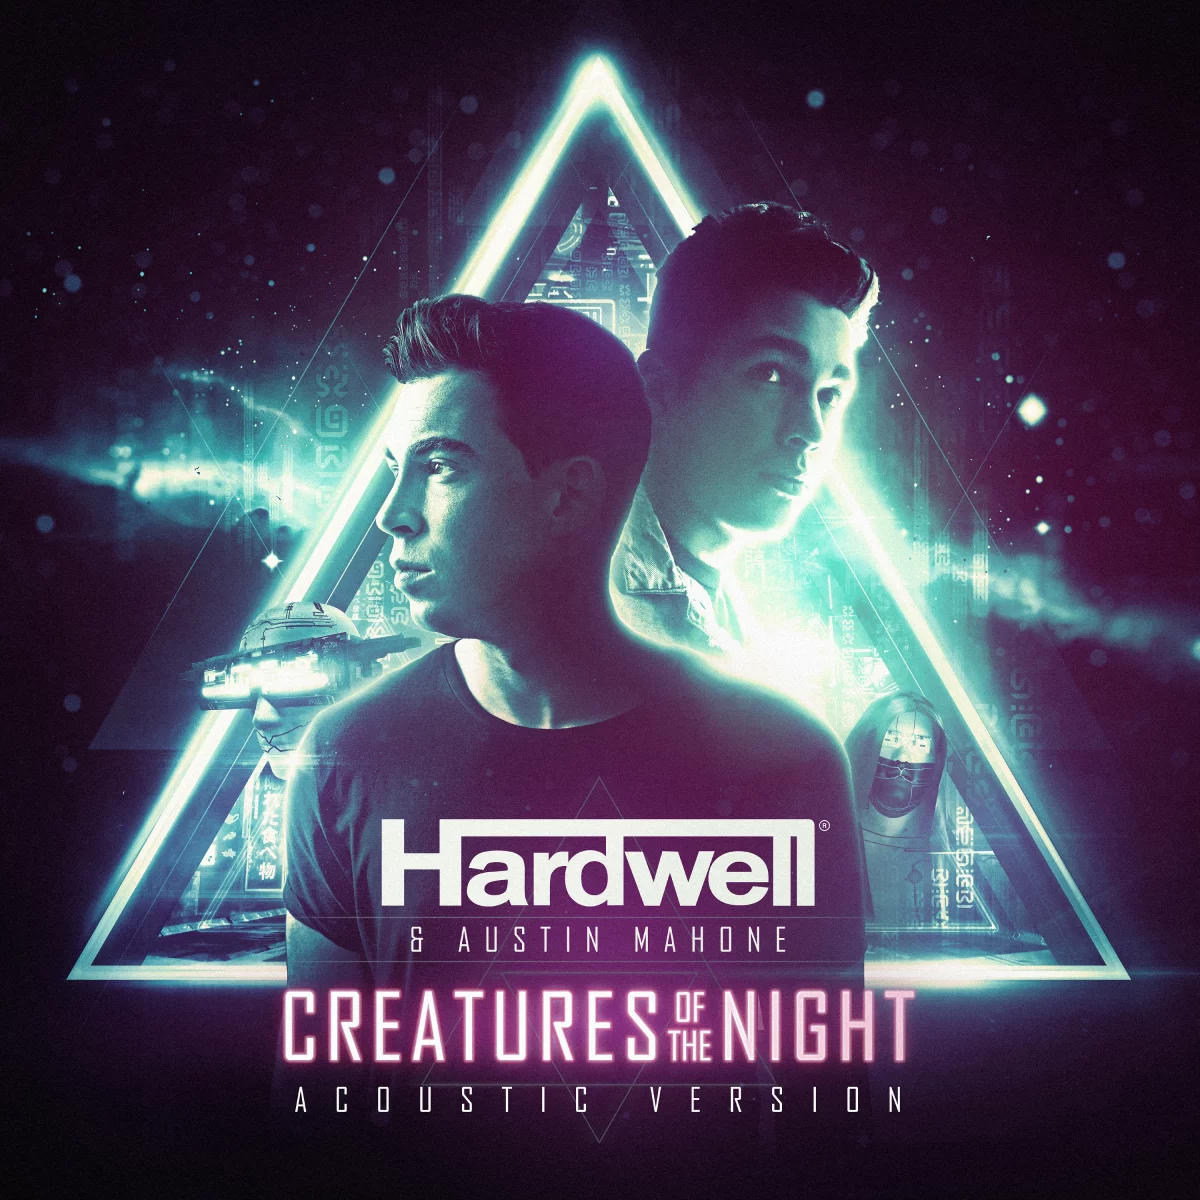 Creatures Of The Night (Acoustic Version) - Hardwell & Austin Mahone